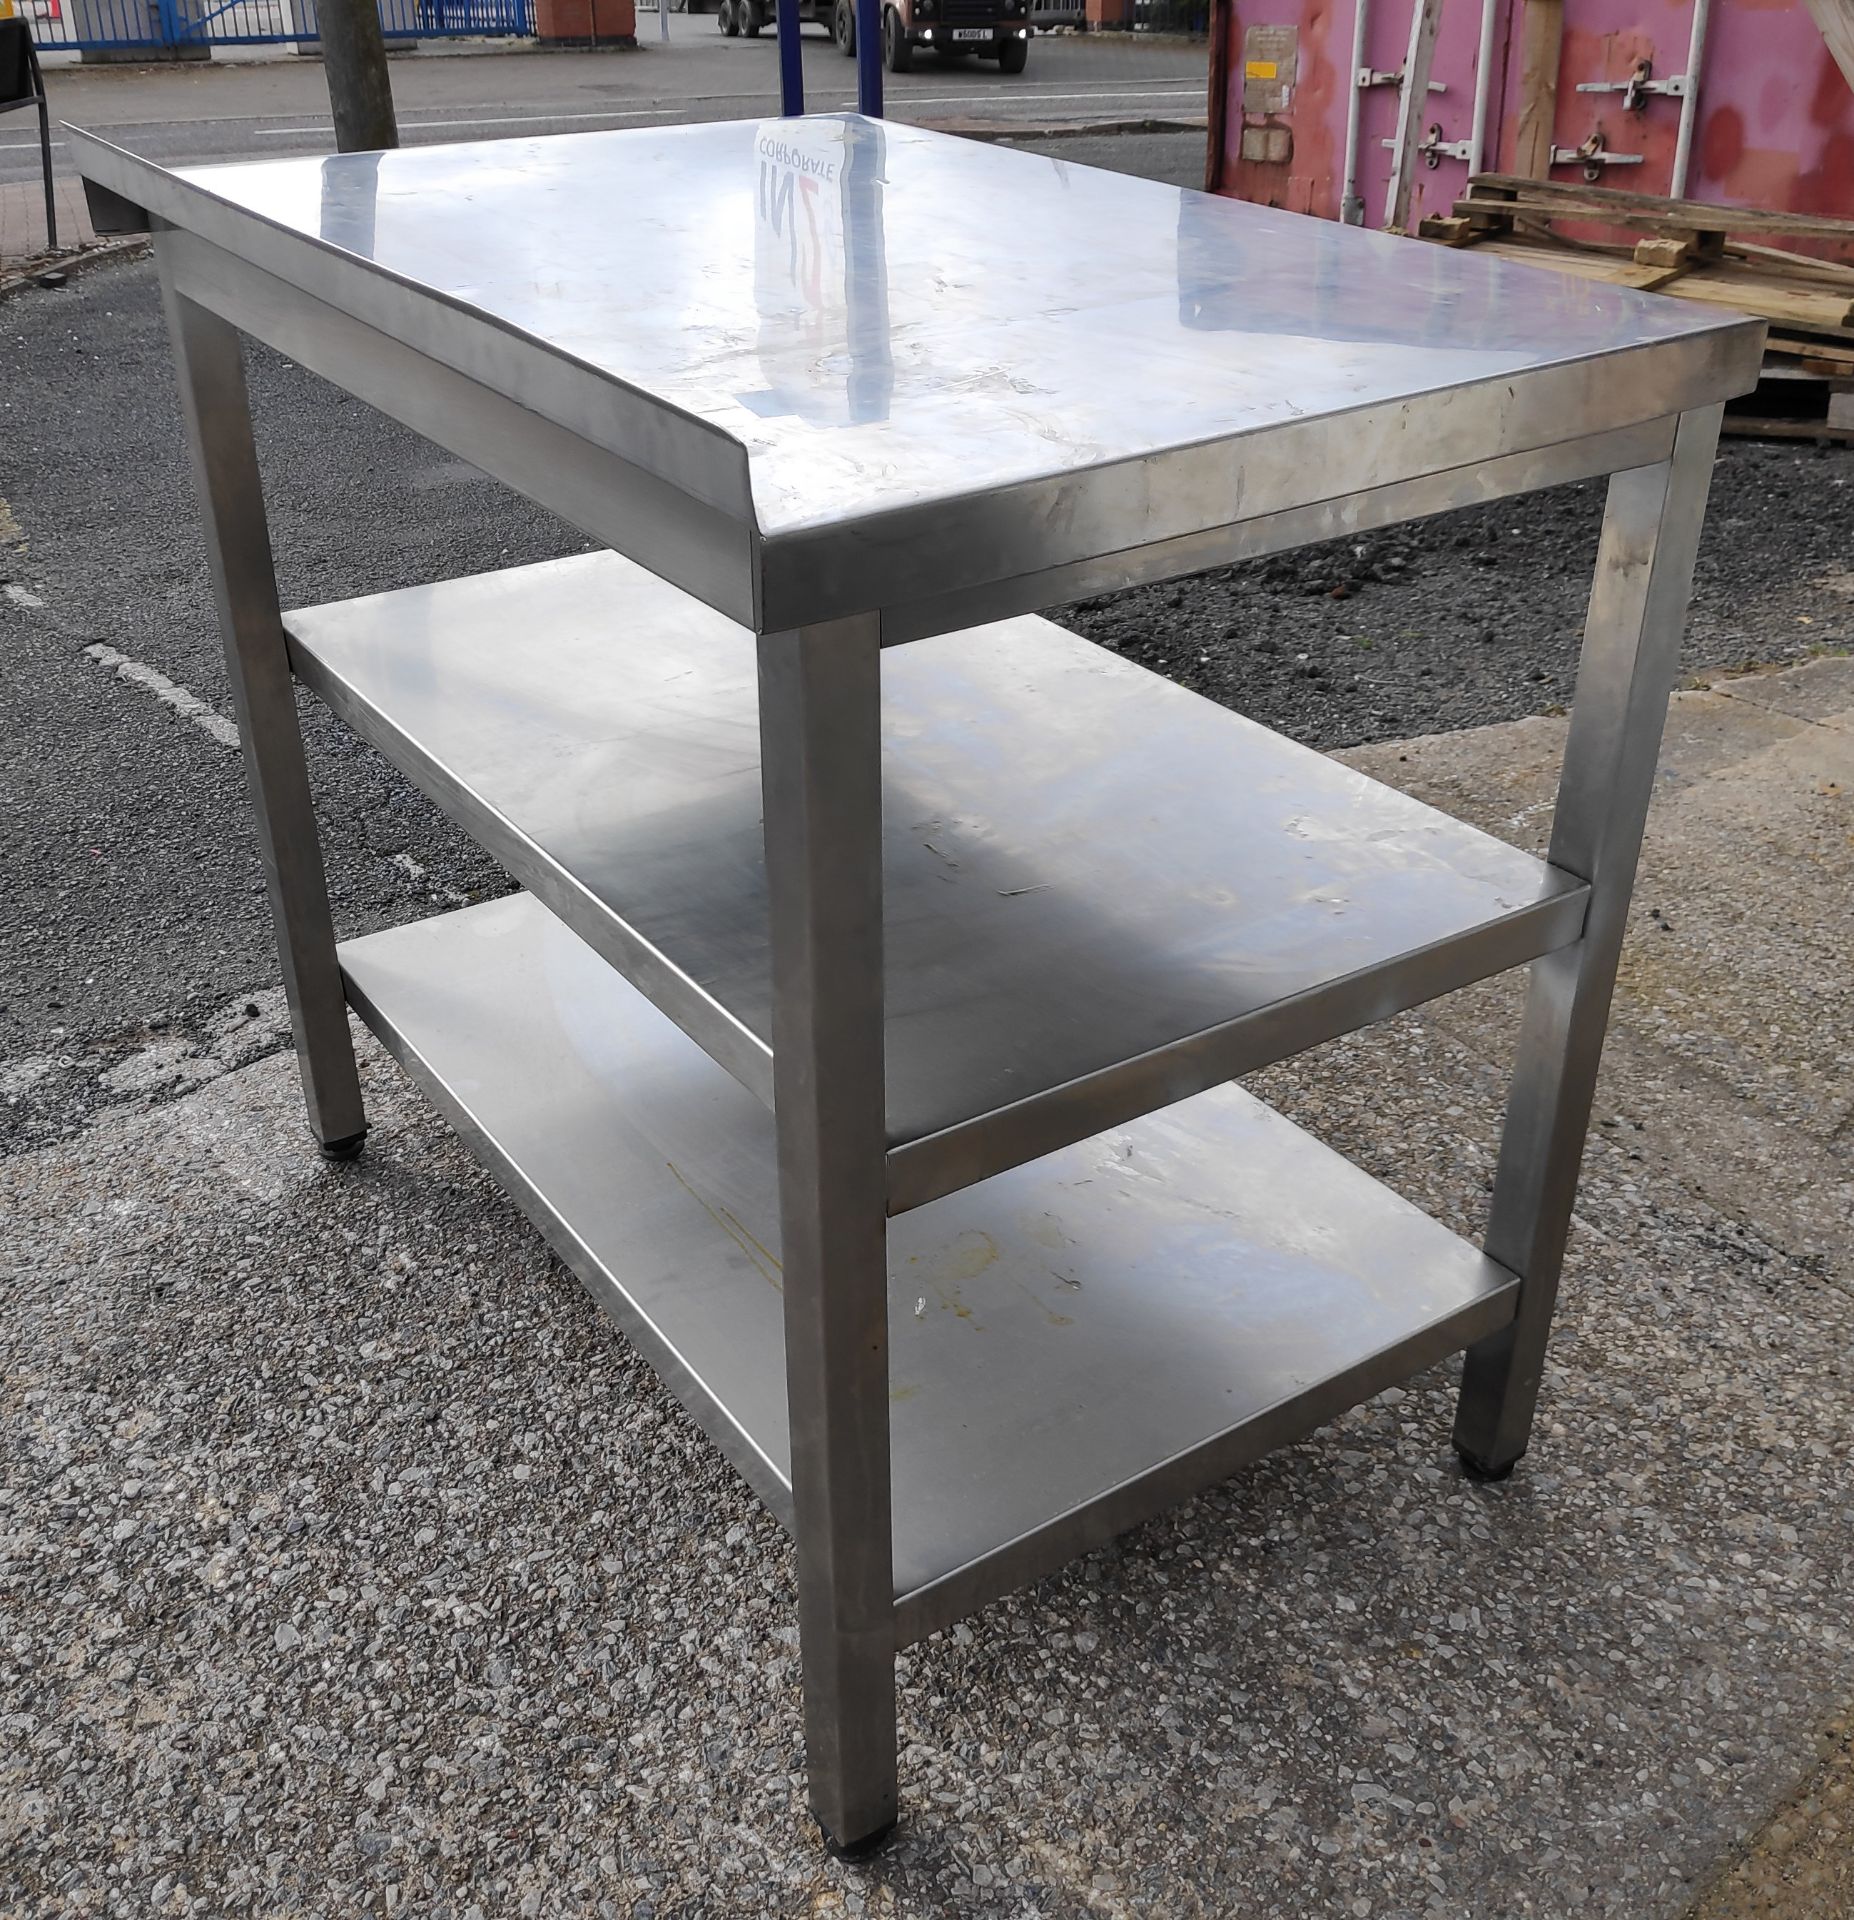 1 x Stainless Steel Prep Bench with Upstand and 2 Shelves - 95cm (L) x 66cm (D) x 90.5cm (H) - - Image 7 of 8